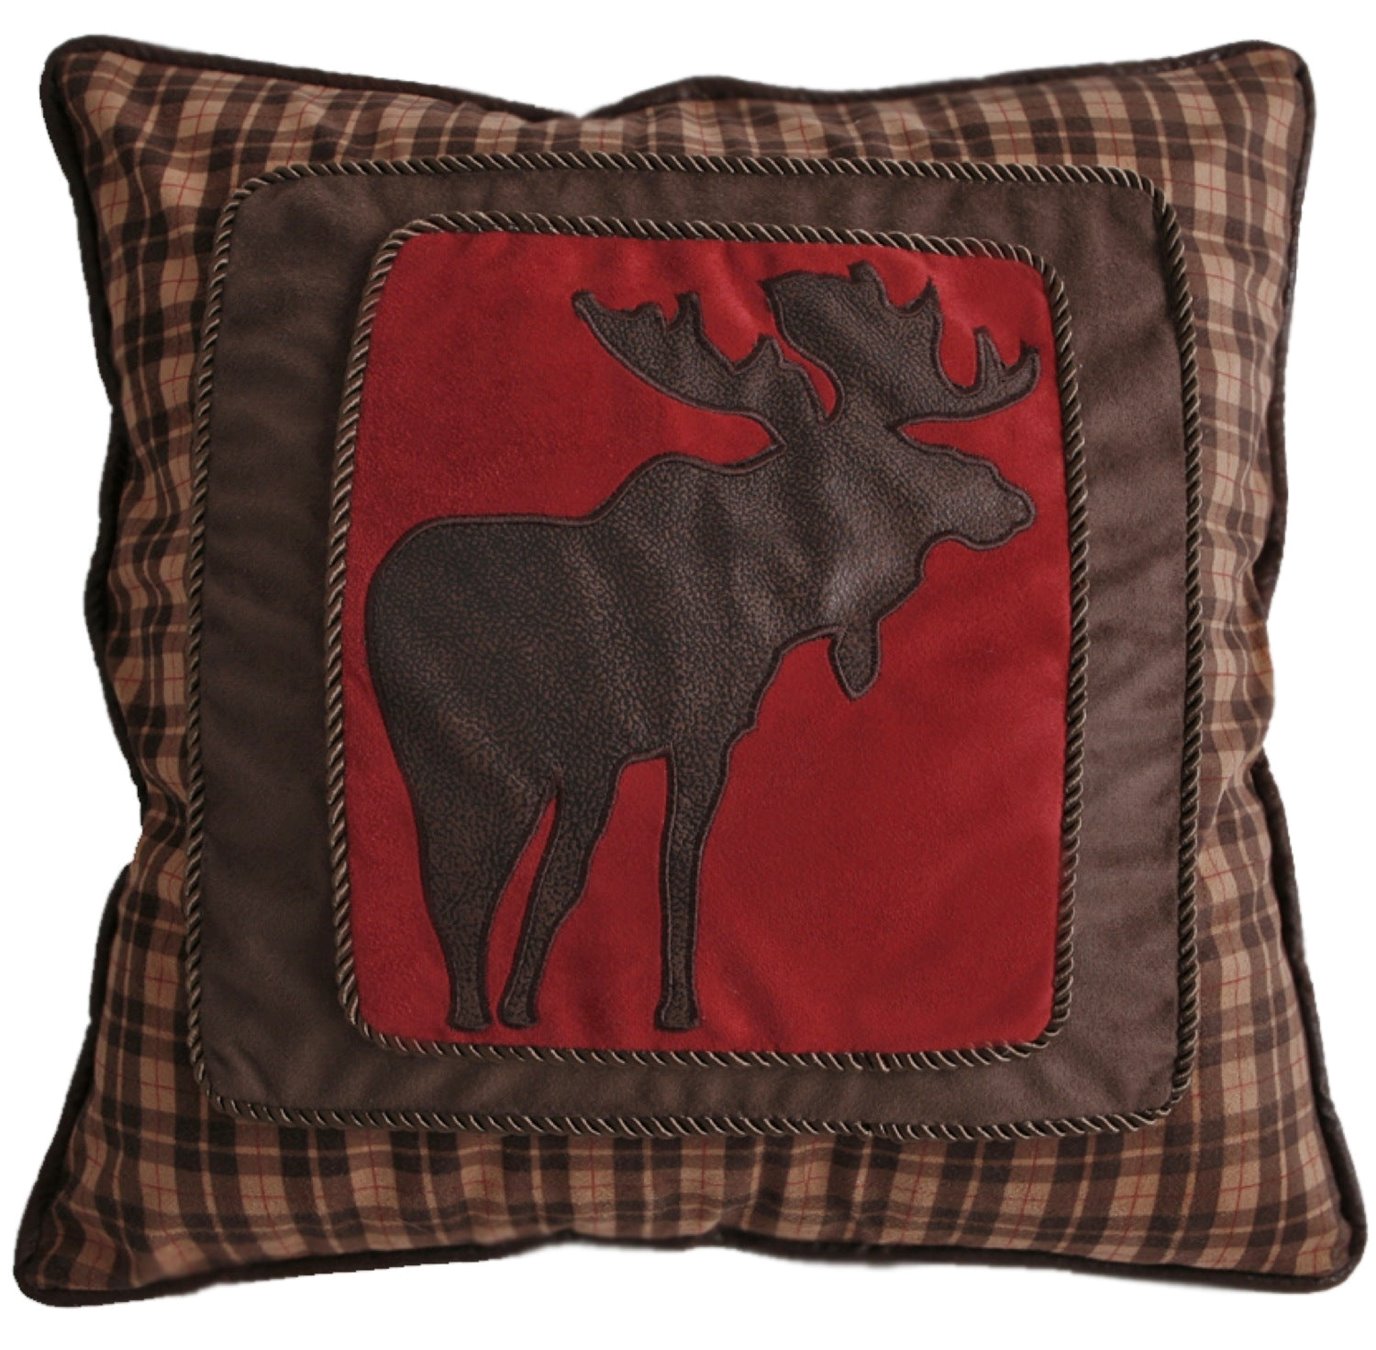 Carstens Frame Moose Rustic Cabin Red Throw Pillow 18" x 18"